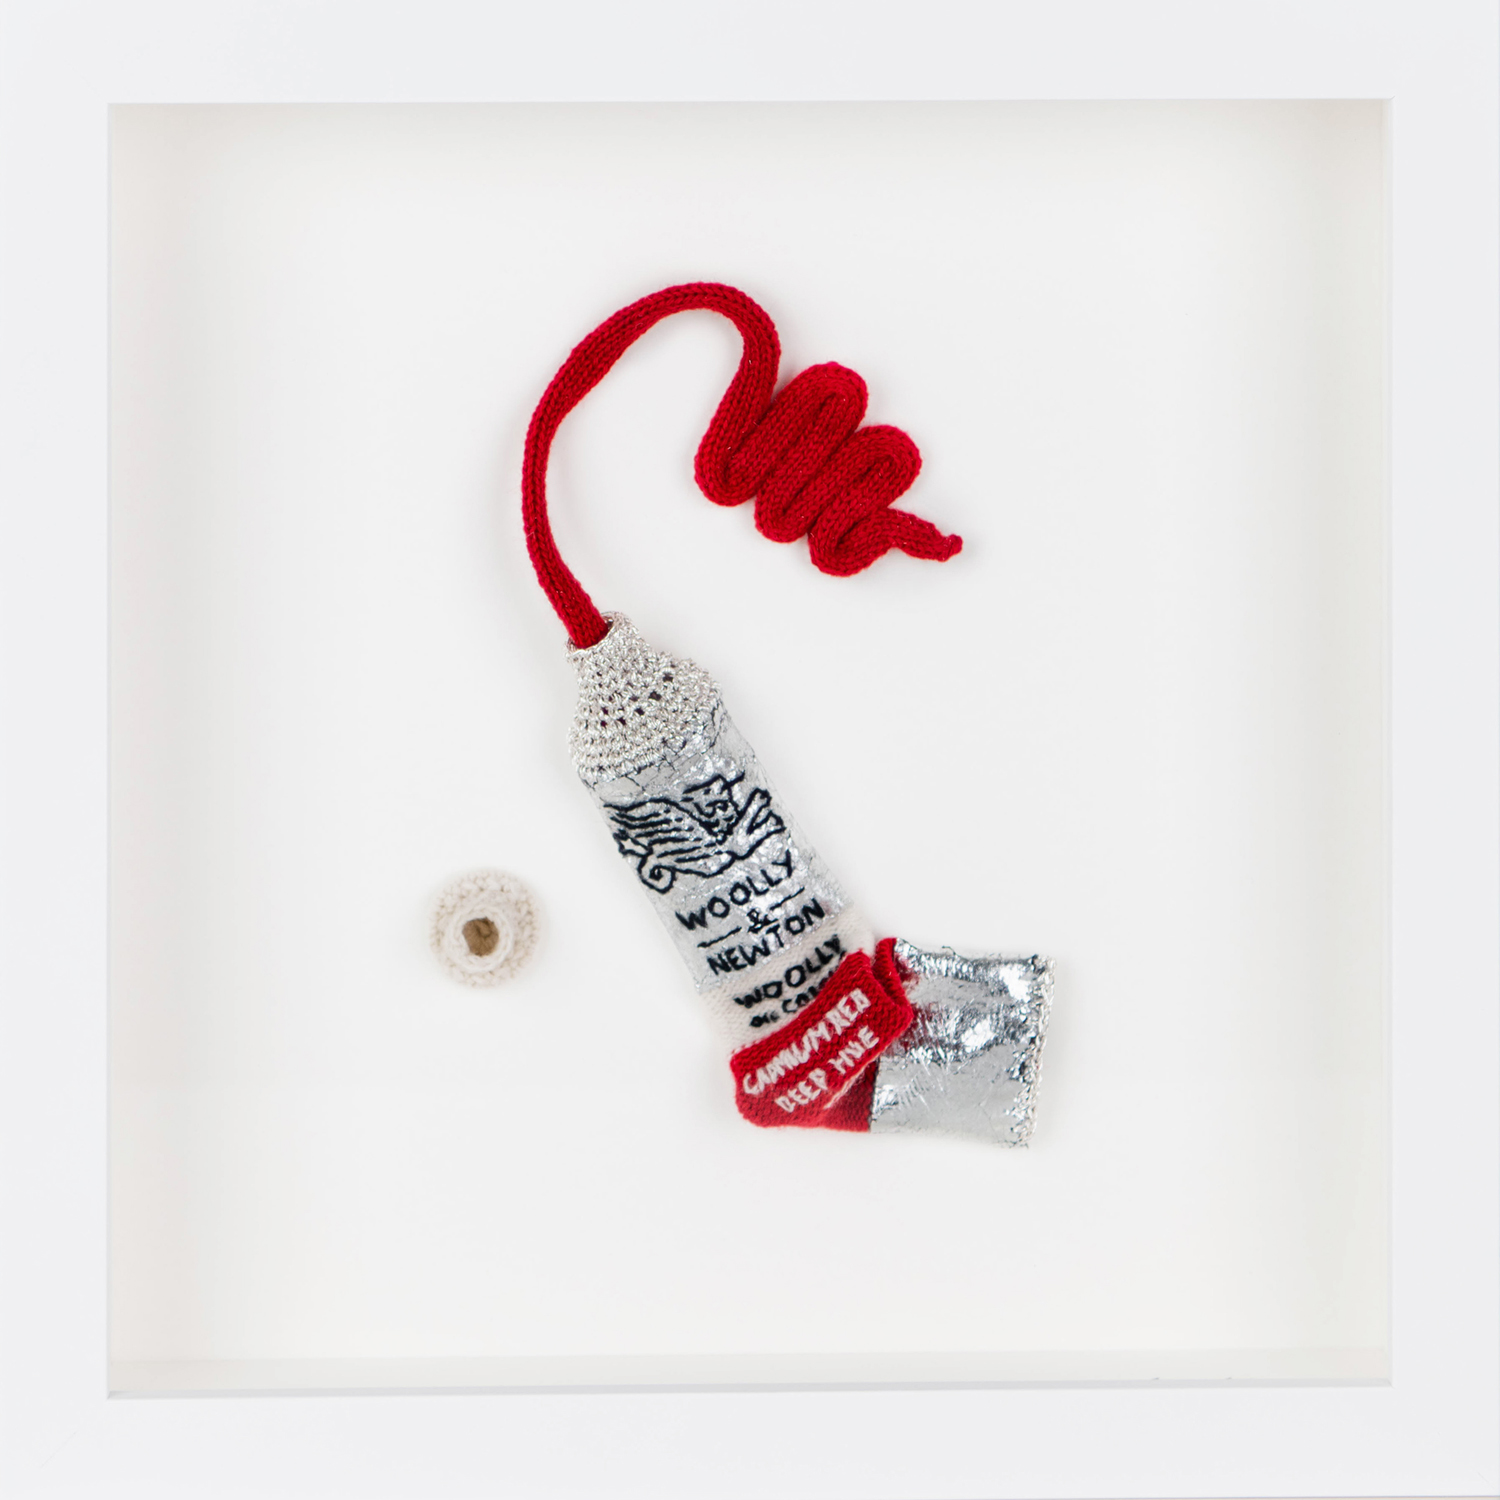 Cadmium Red ‘Woolly & Newton’ limited edition knitted paint tube